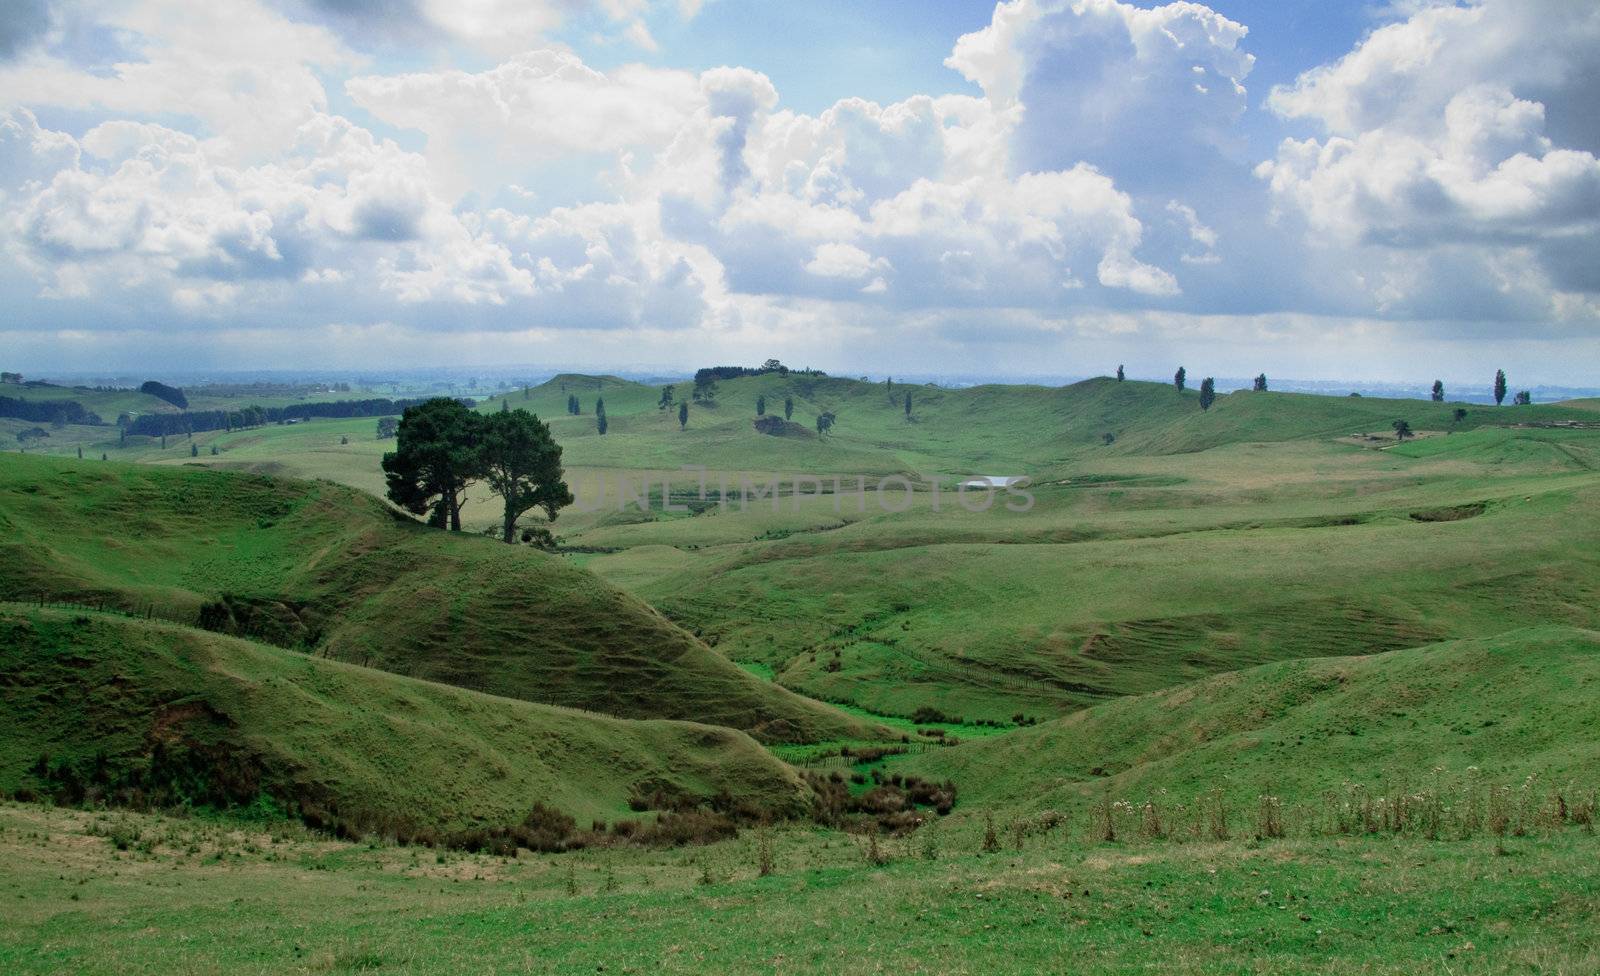 The Shire in the Lord of the Rings was set in this rolling countryside valley in New Zealand